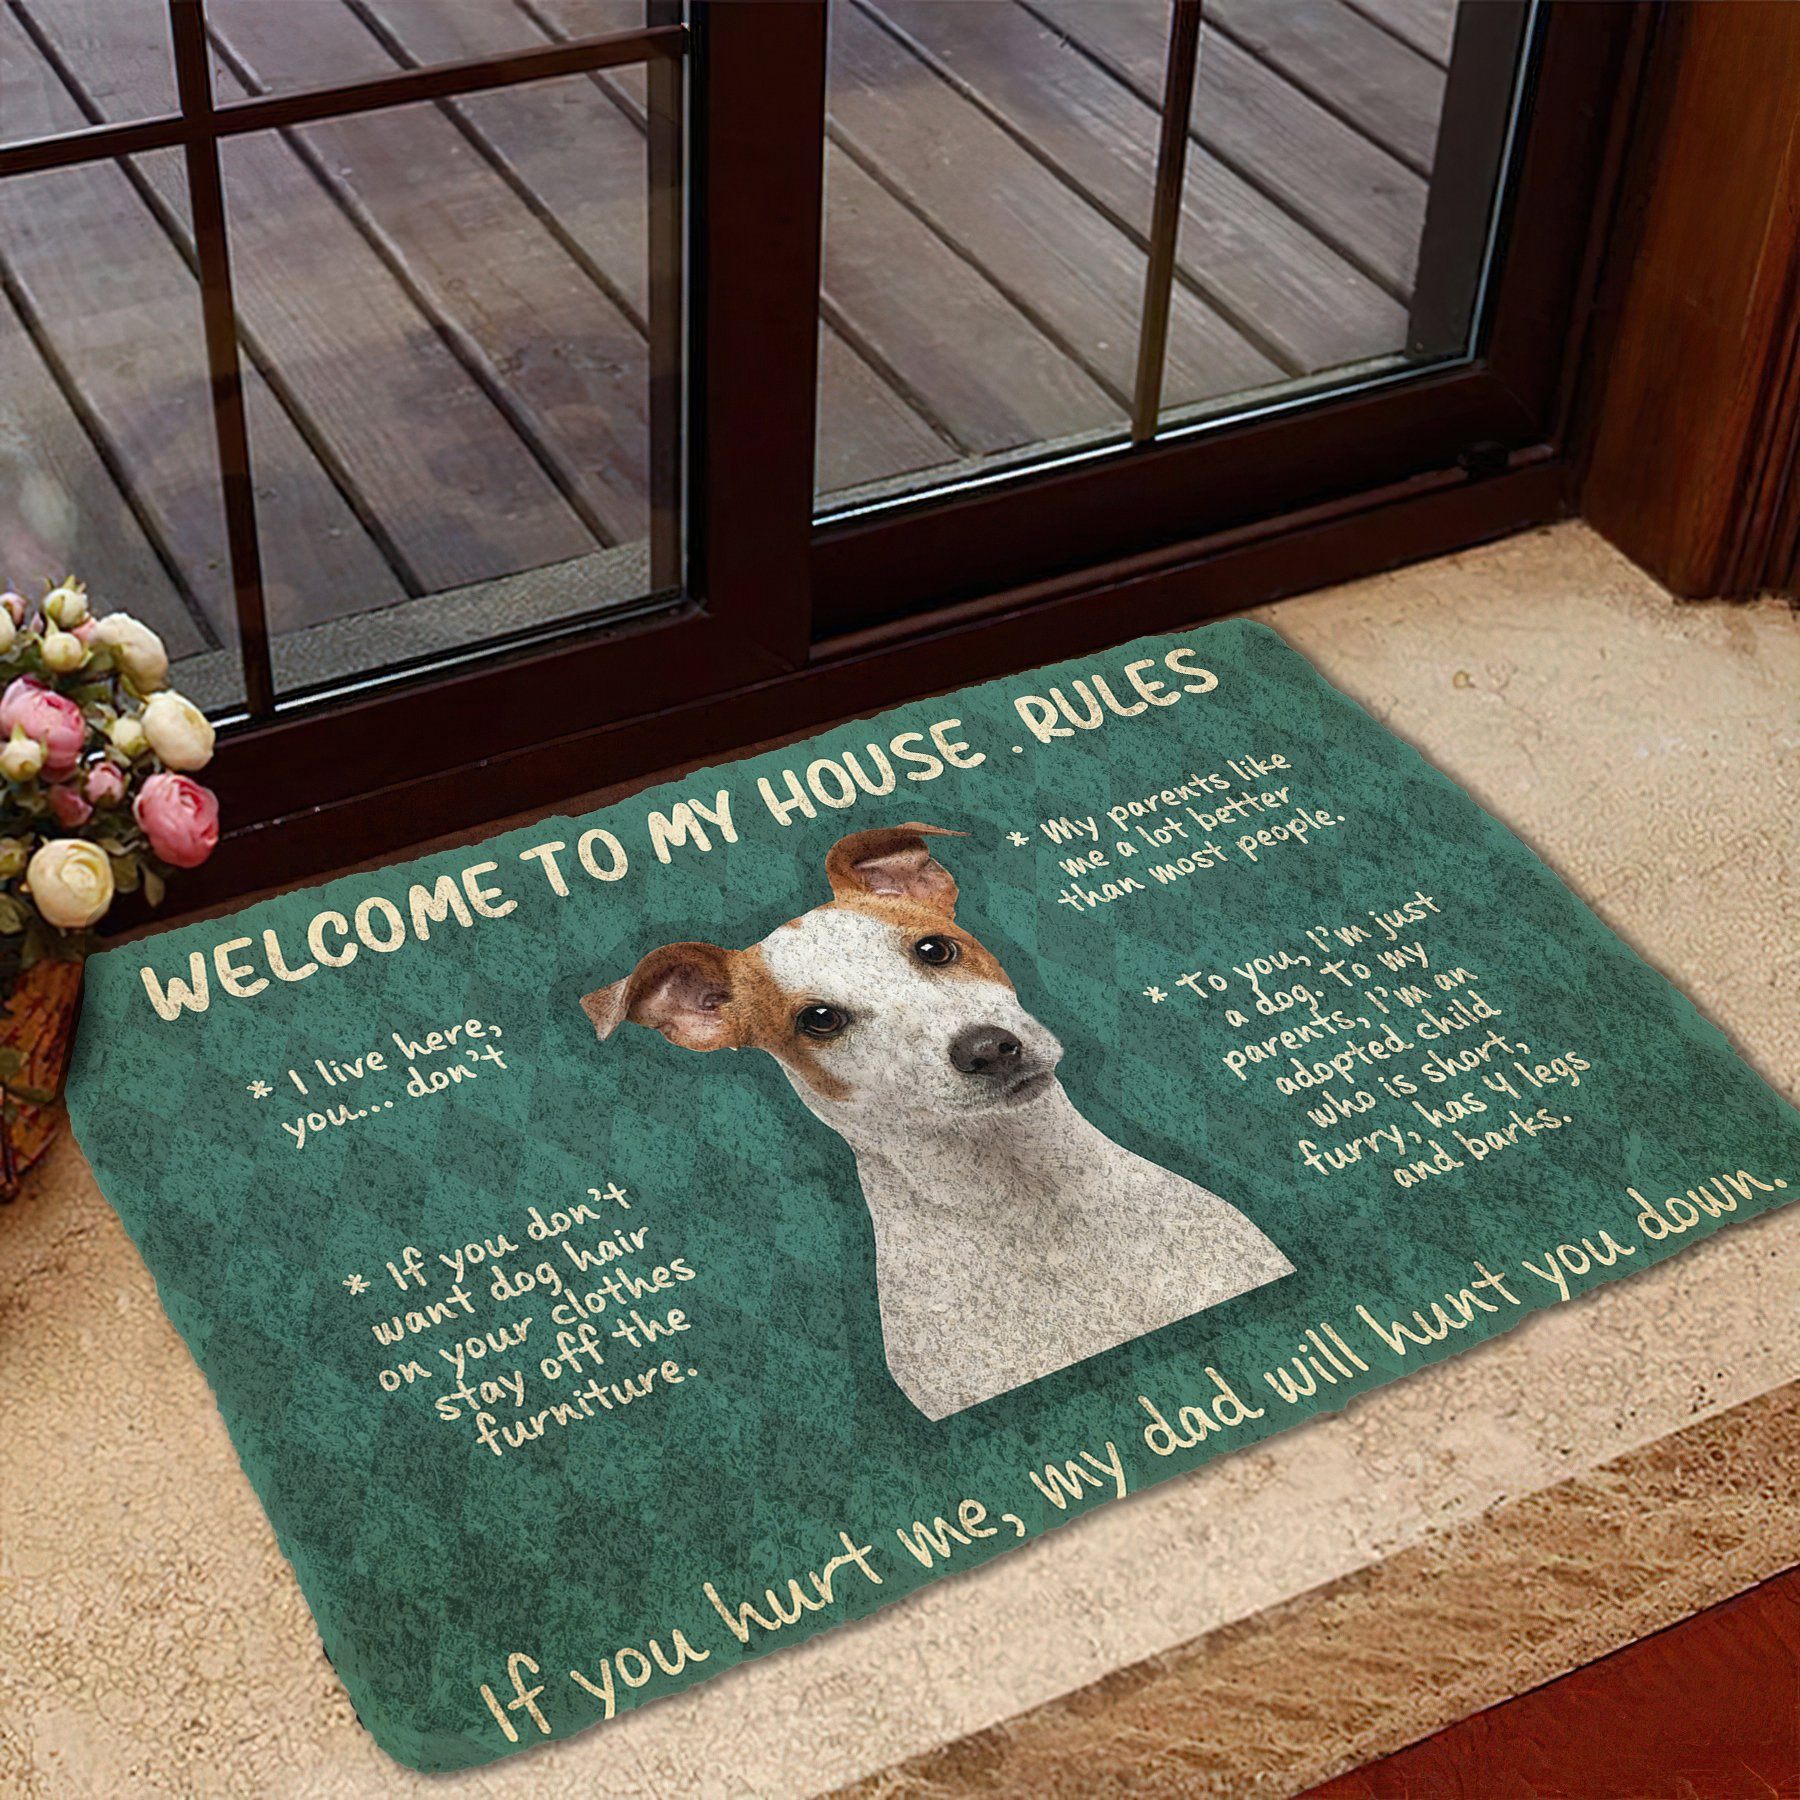 Bugybox 3D Jack Russell Terrier Welcome To My House Rules Doormat